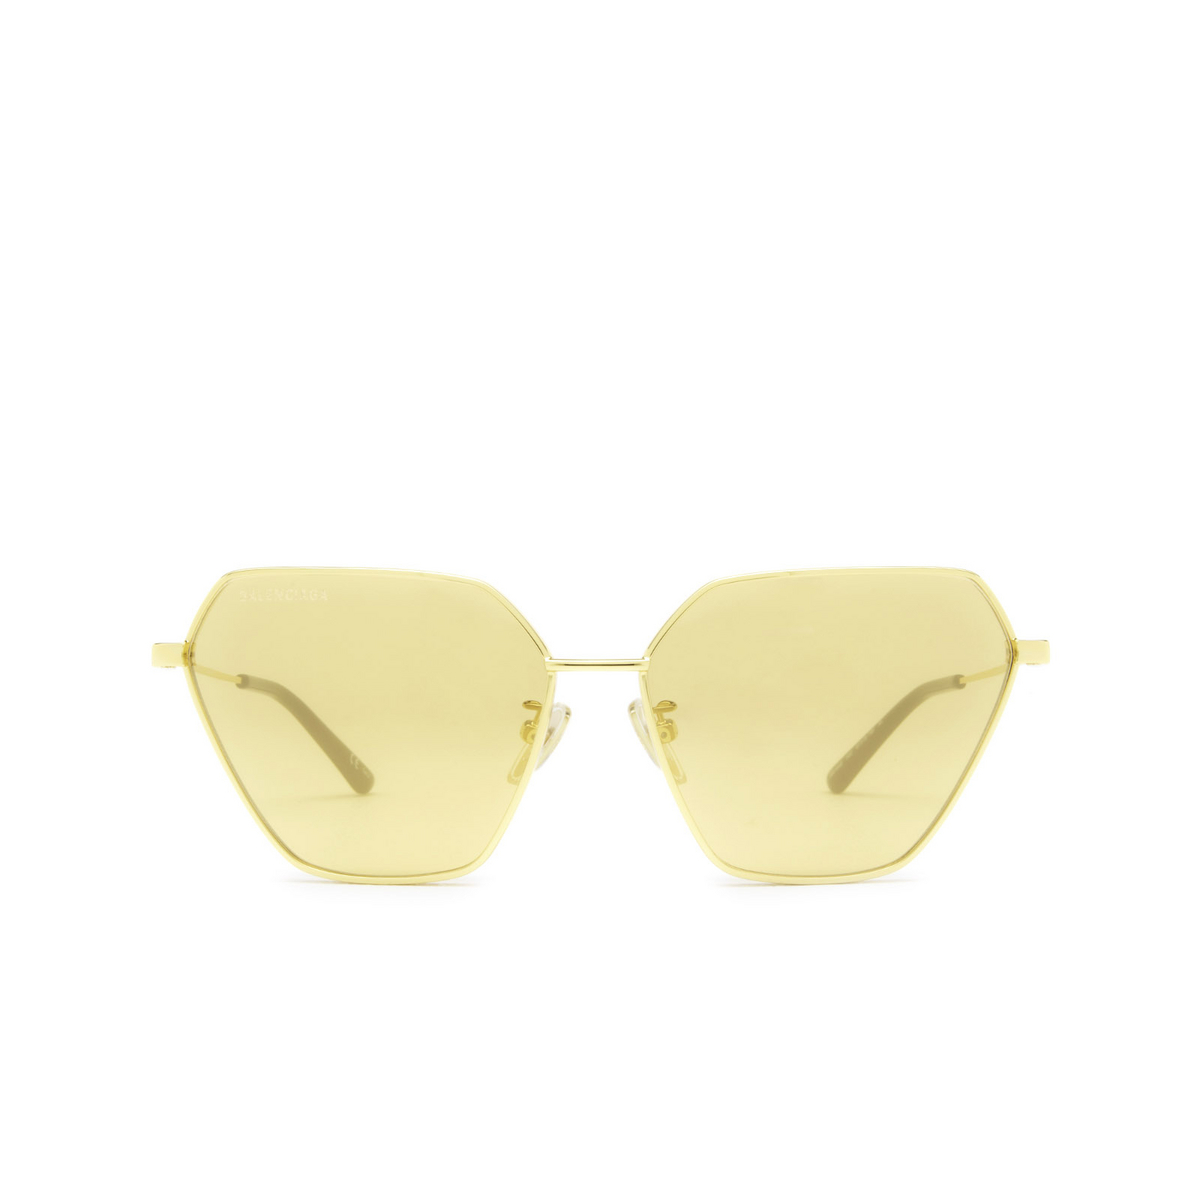 Balenciaga® Butterfly Sunglasses: BB0194S color Gold 002 - front view.